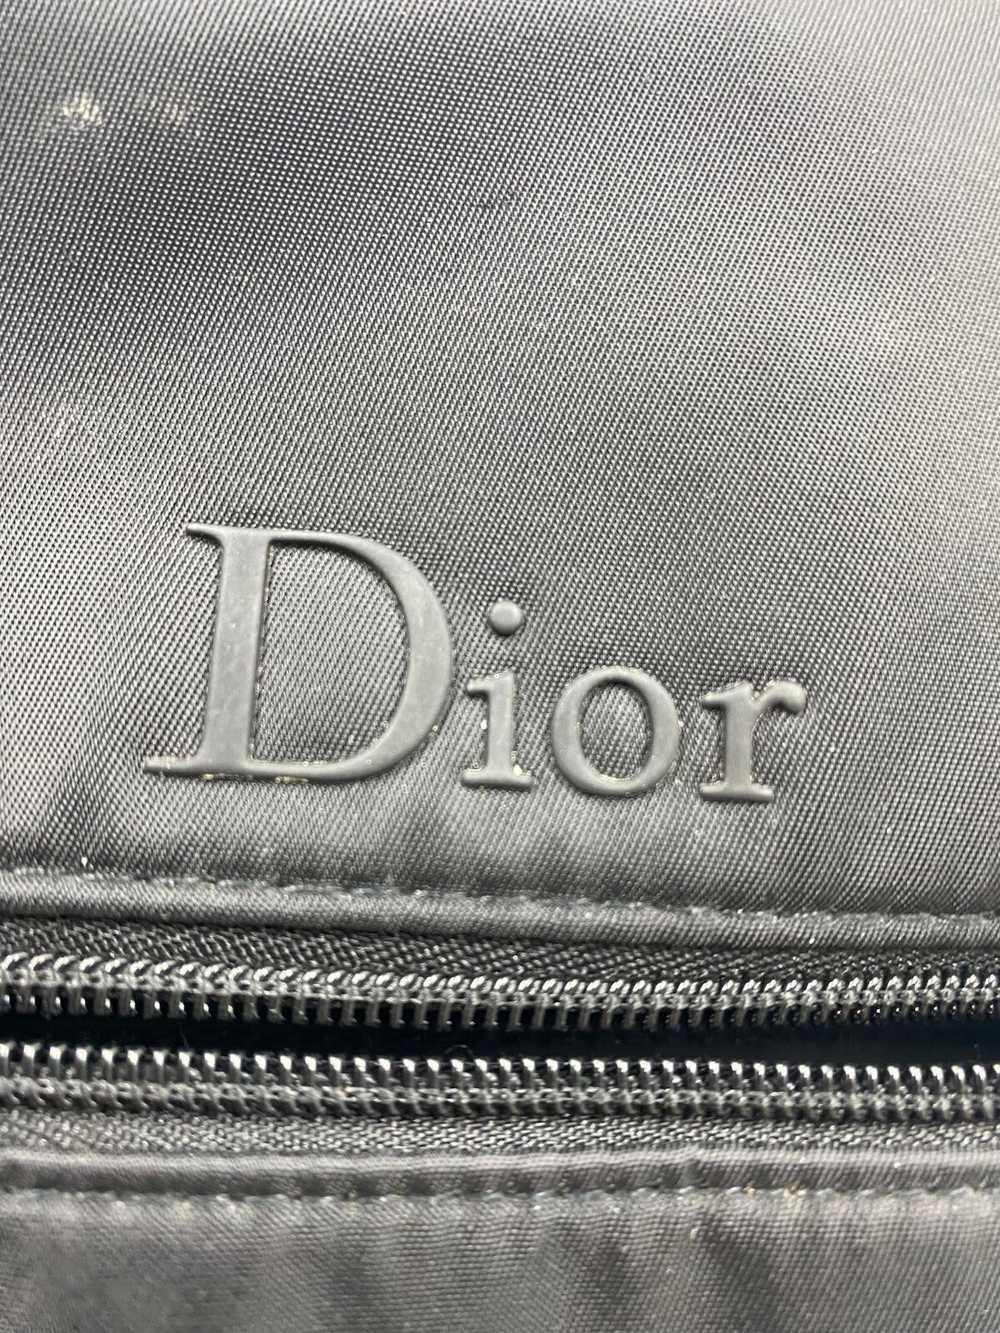 Authentic DIOR Beauty Black Toiletry Travel Case - image 6